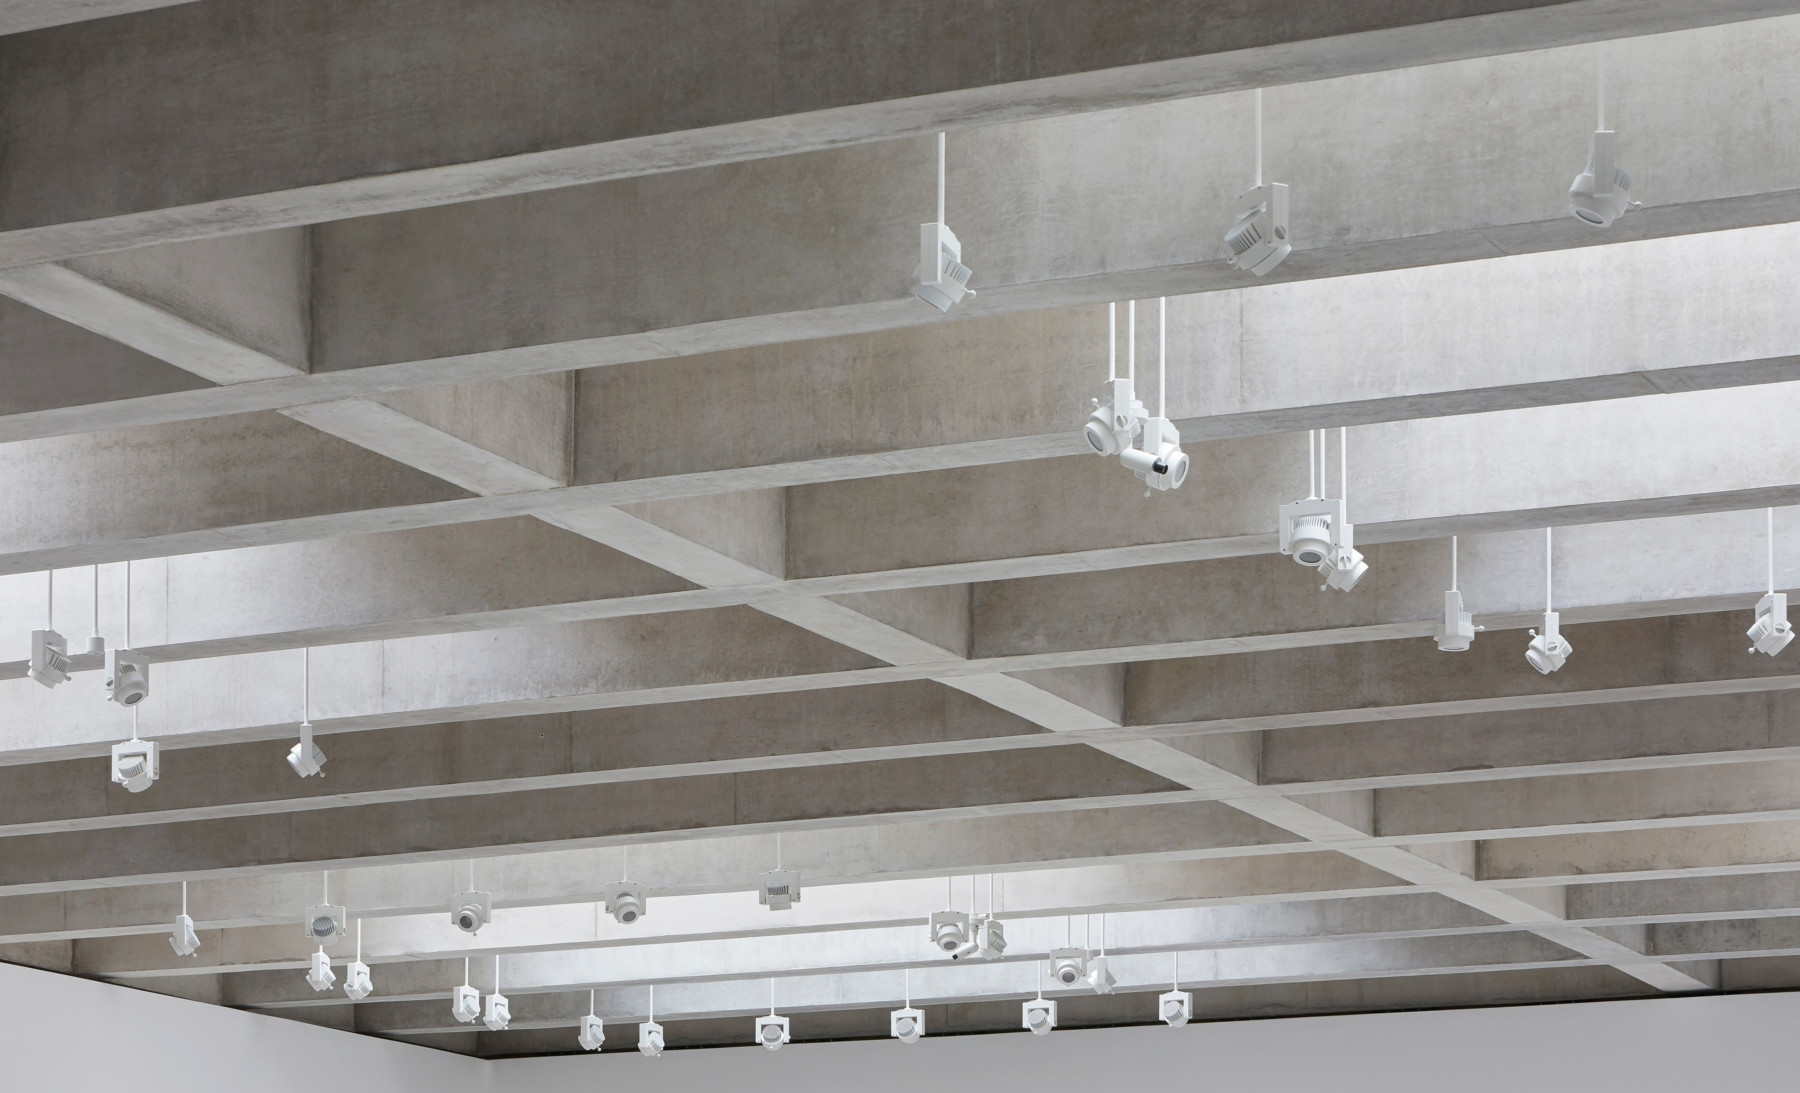 Jamie-fobert-architects-tate-st-ives-concrete-gallery-contemporary-art-hufton+crow